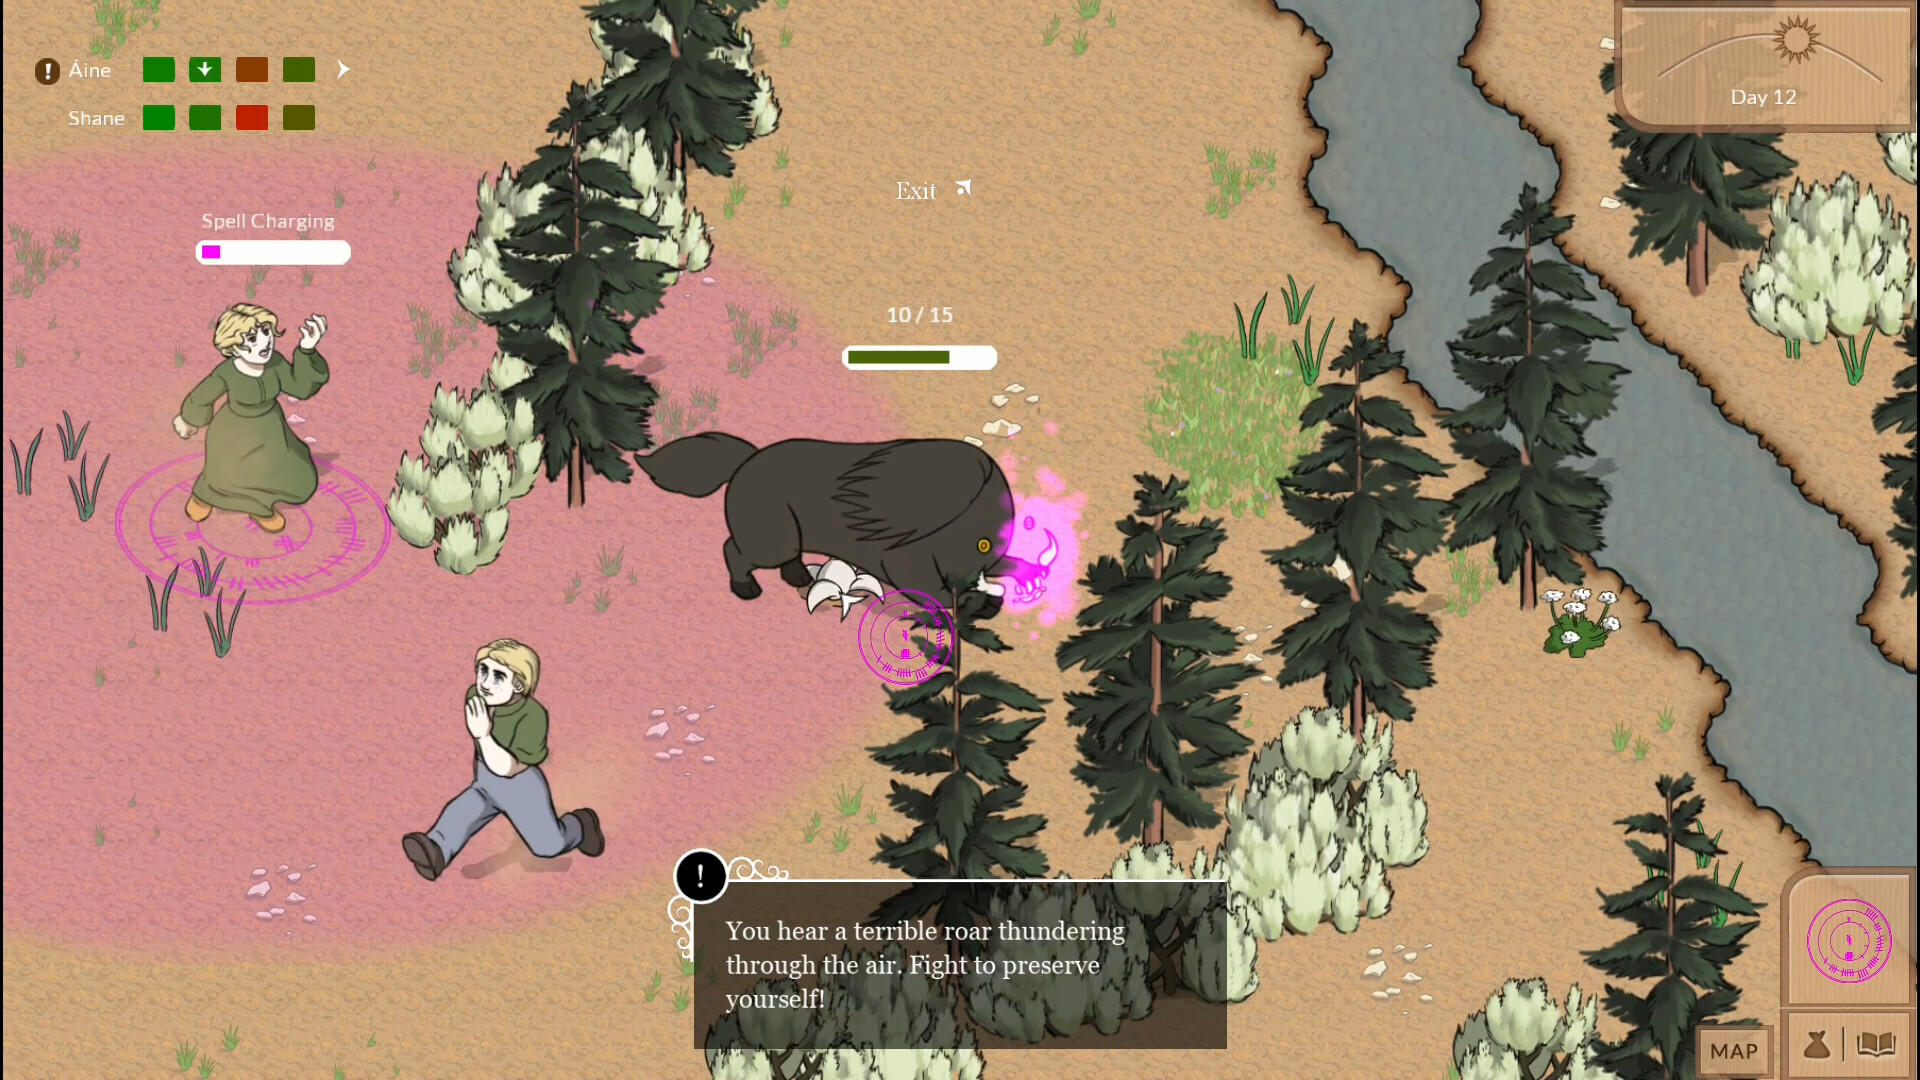 Veil of Dust: A Homesteading Game screenshot game